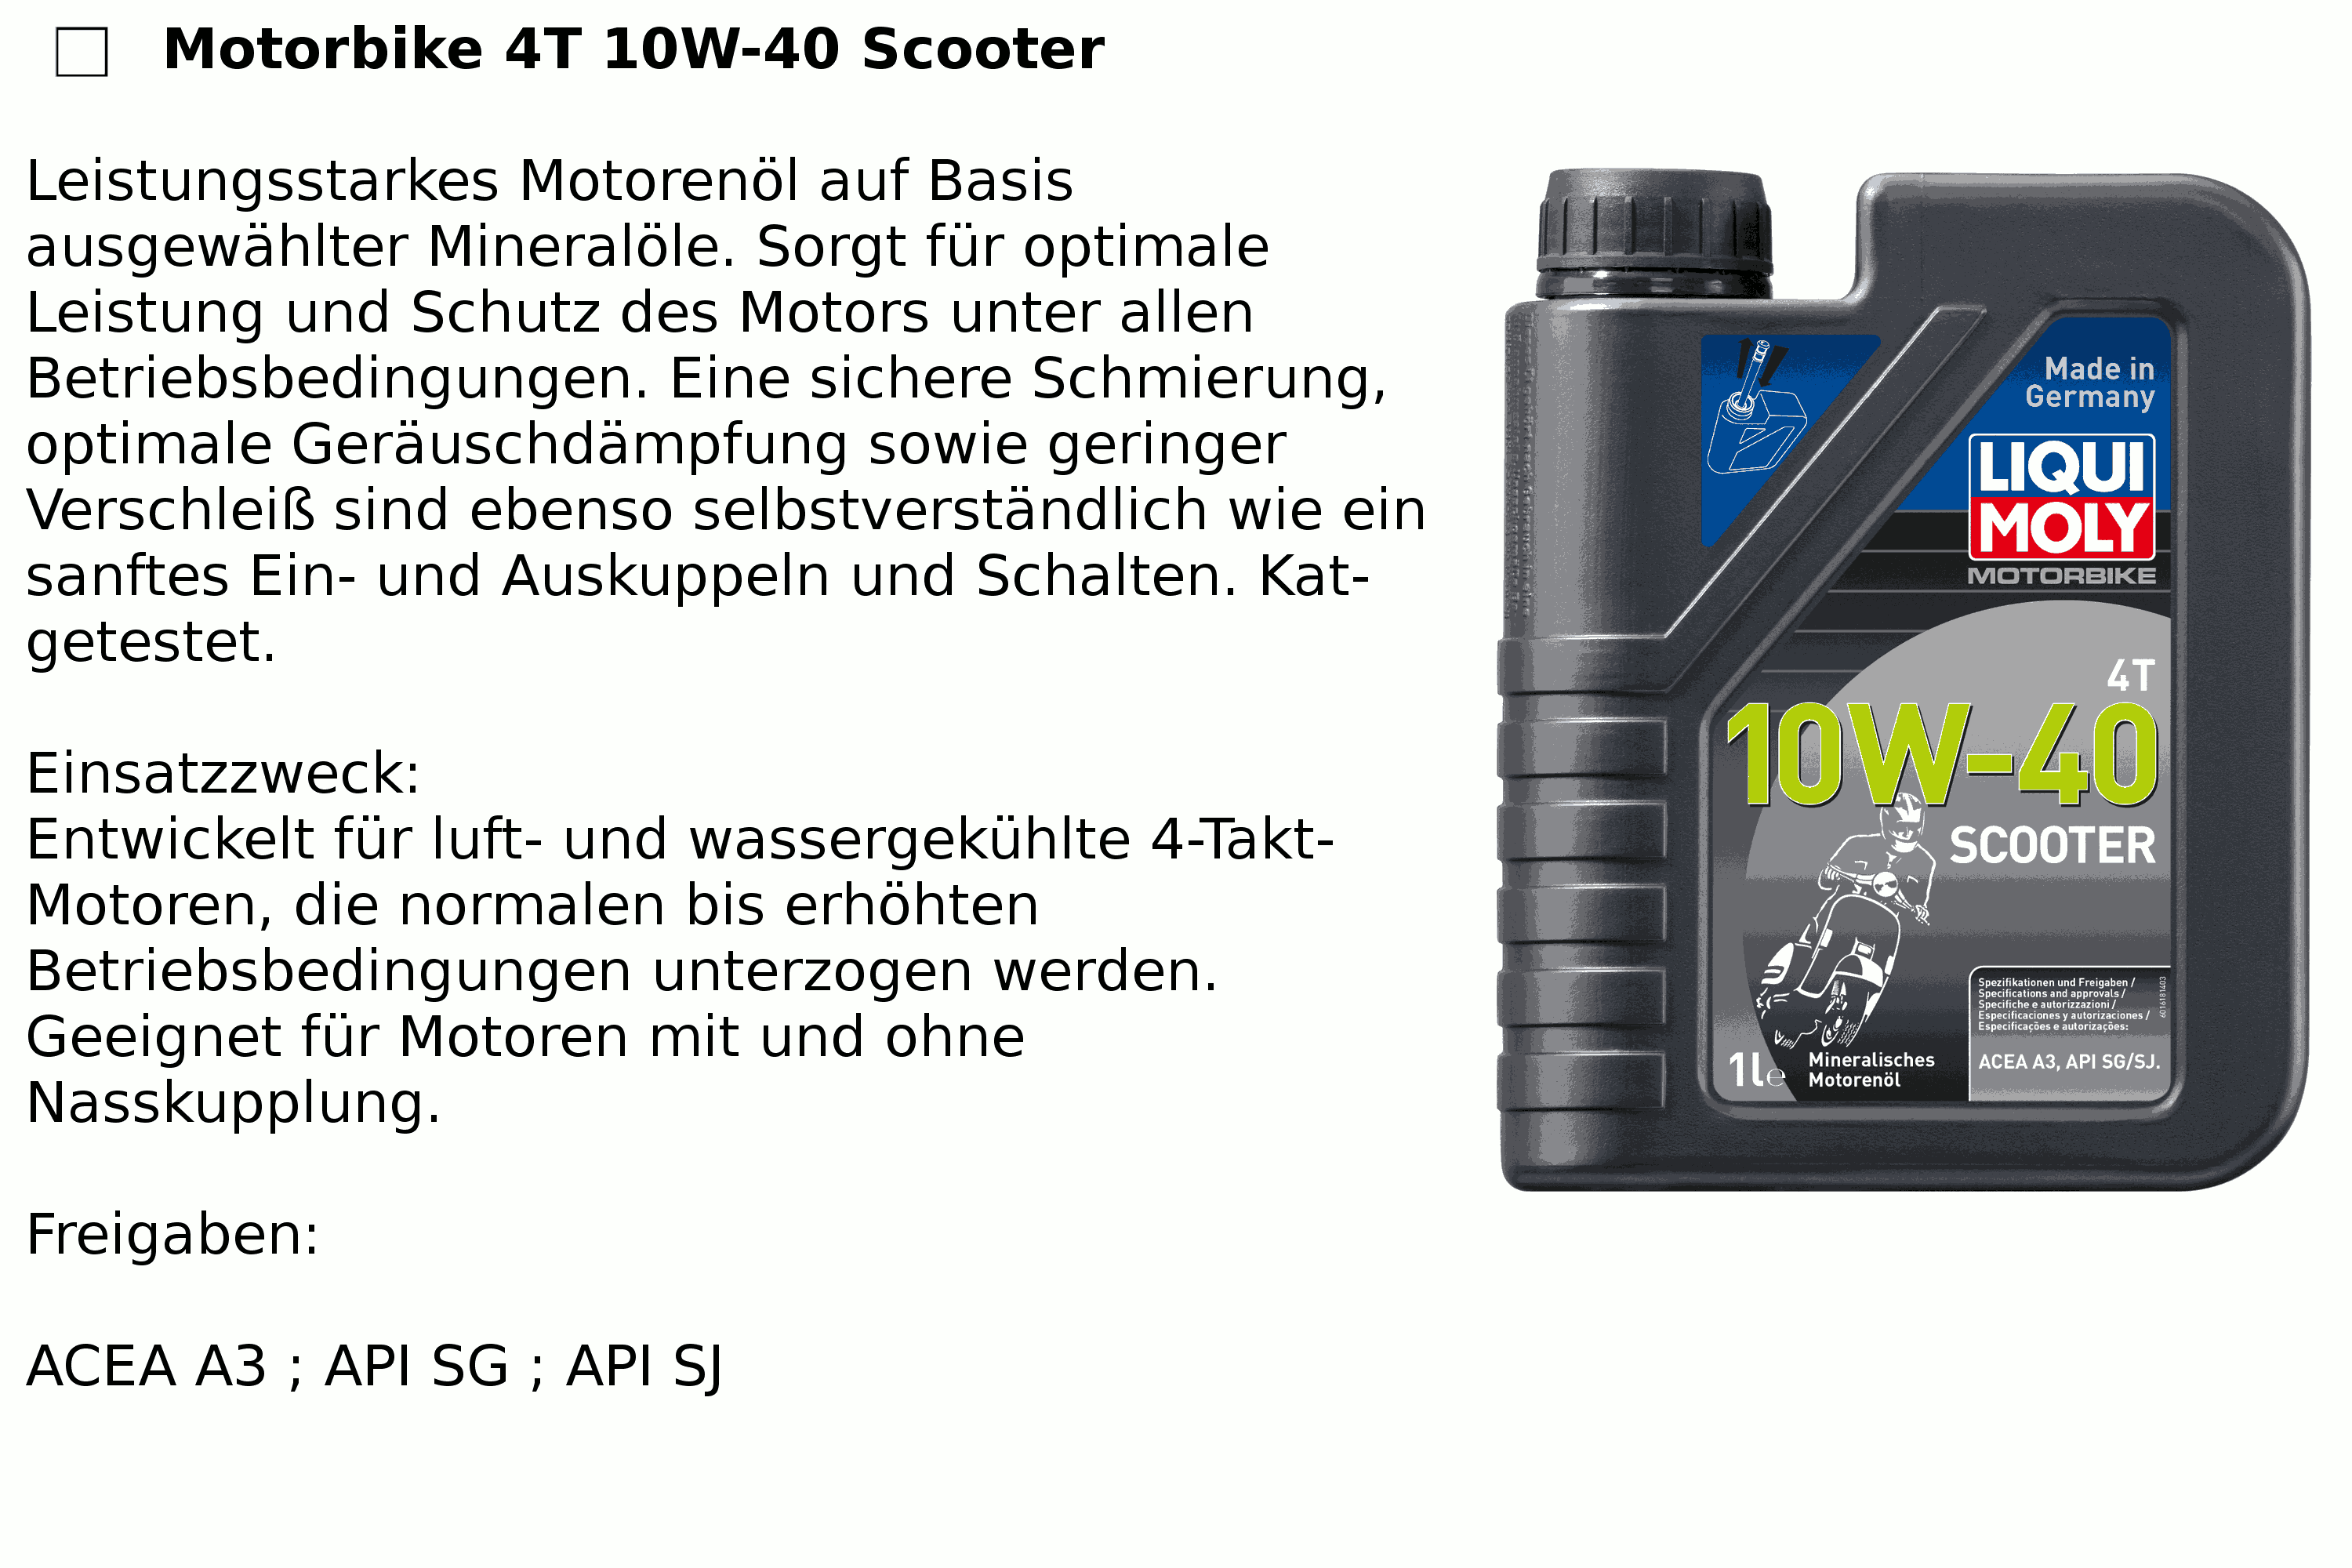 4T 10W-40 Scooter